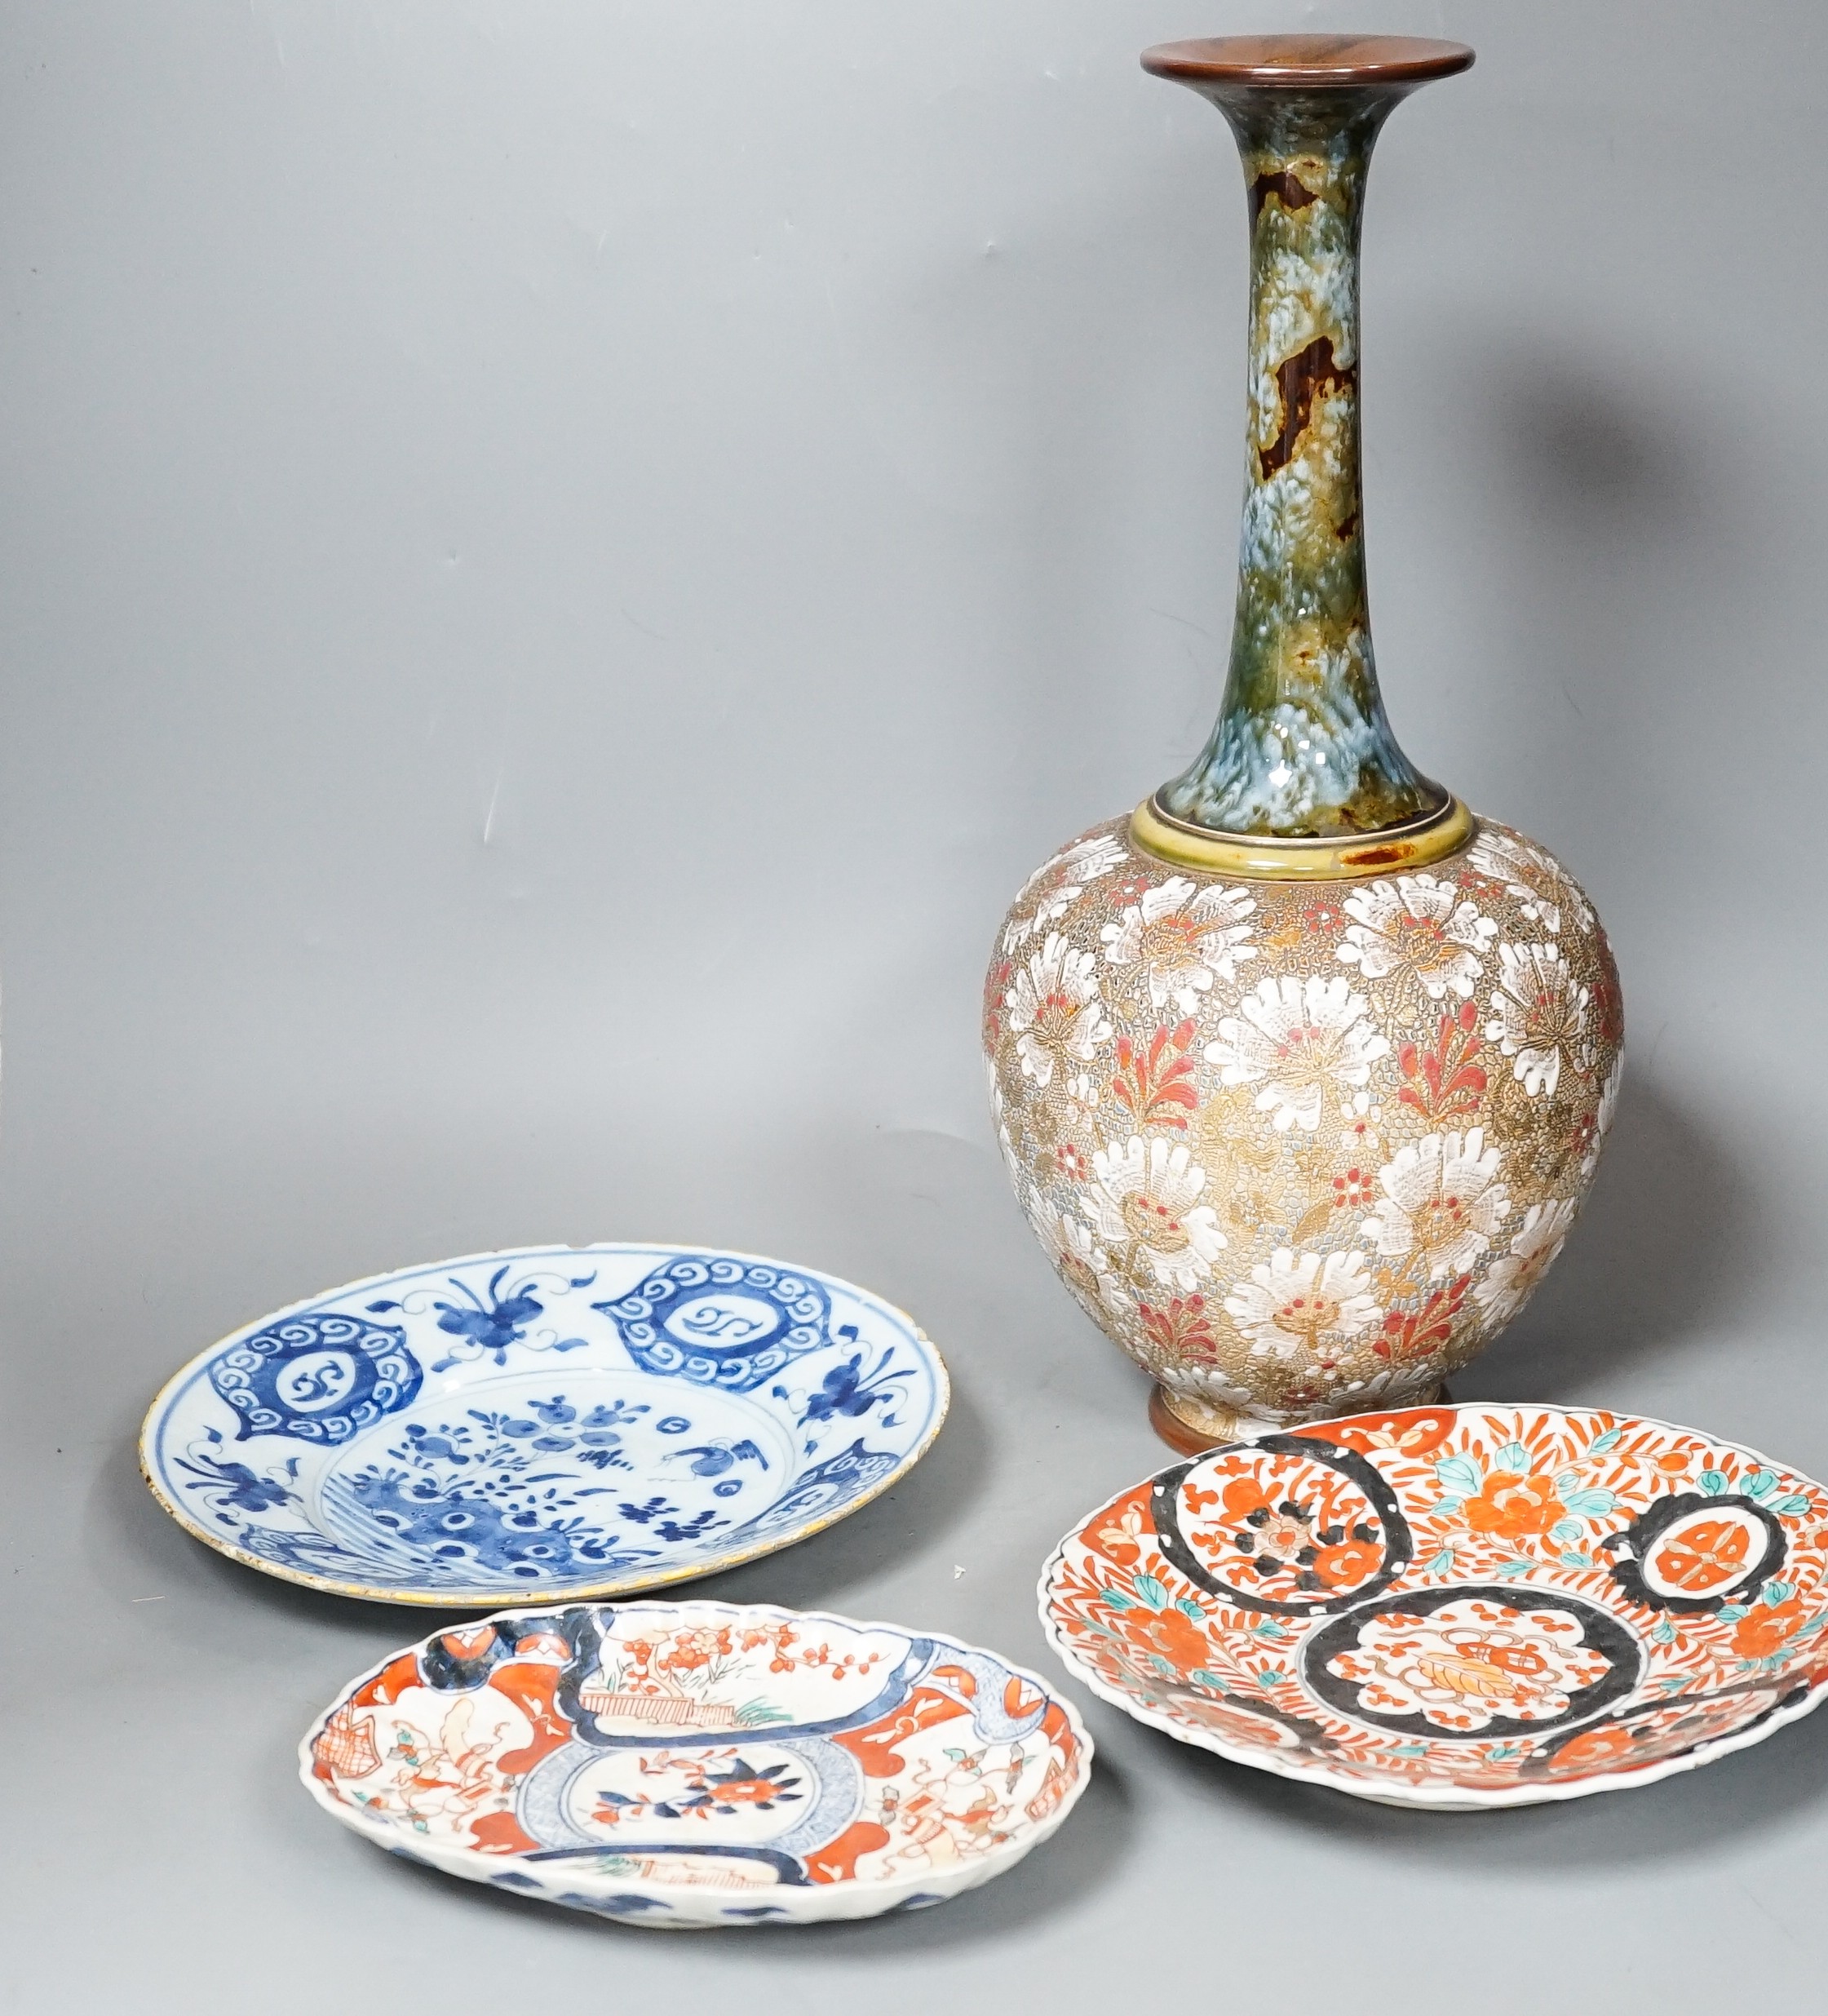 A Doulton slaters patent vase, height 40cm, two Imari dishes and an 18th century Delft blue and white plate